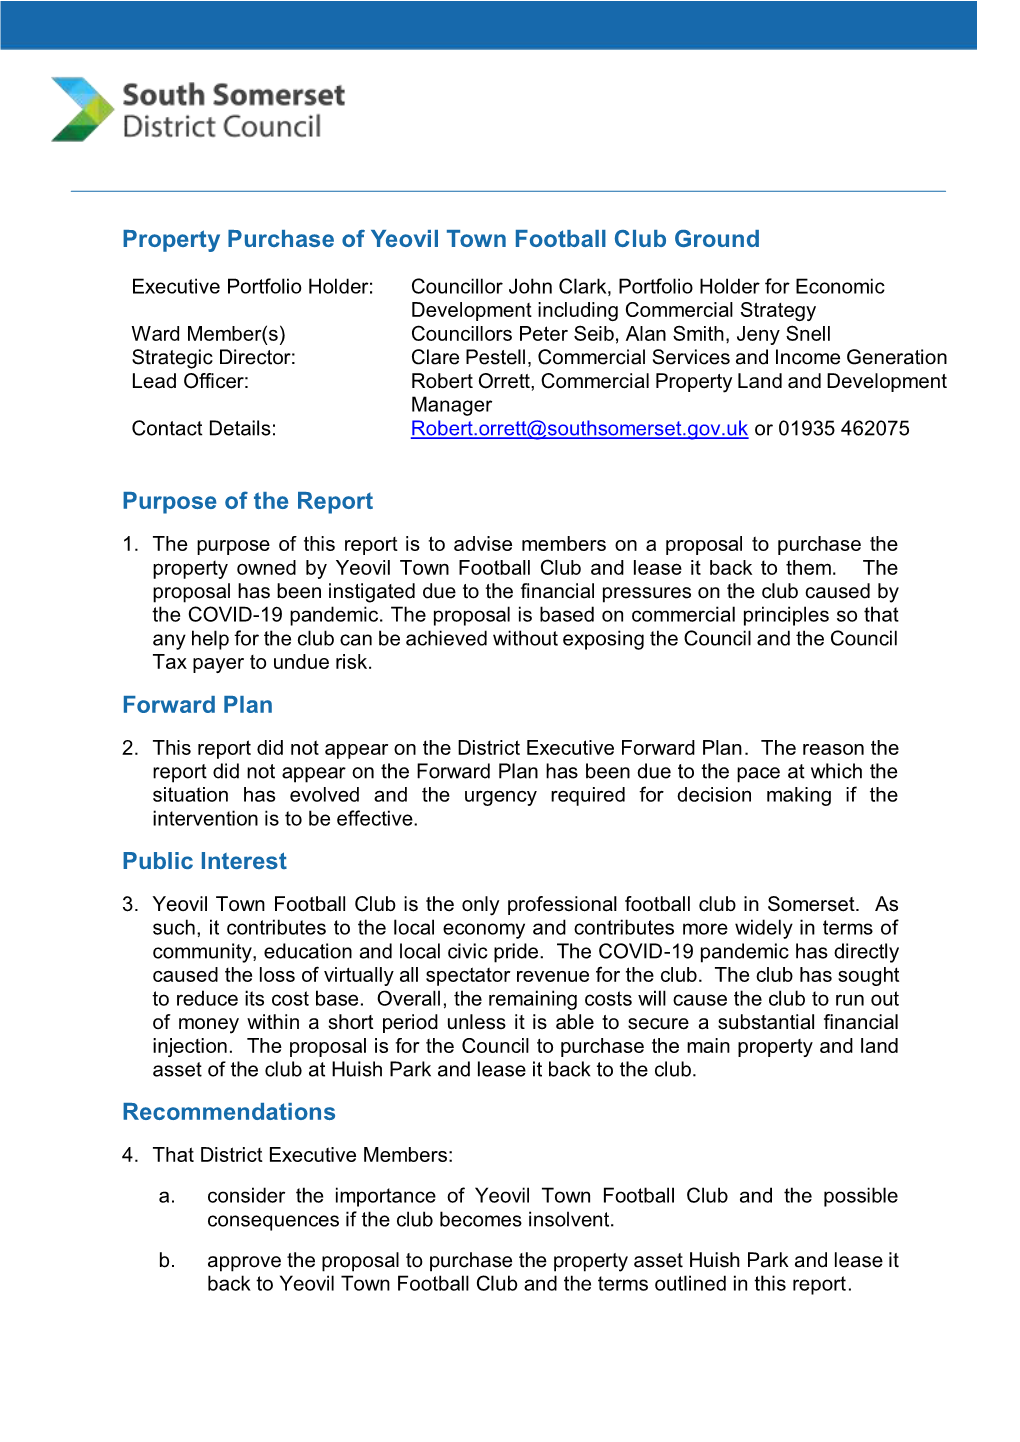 Property Purchase of Yeovil Town Football Club Ground